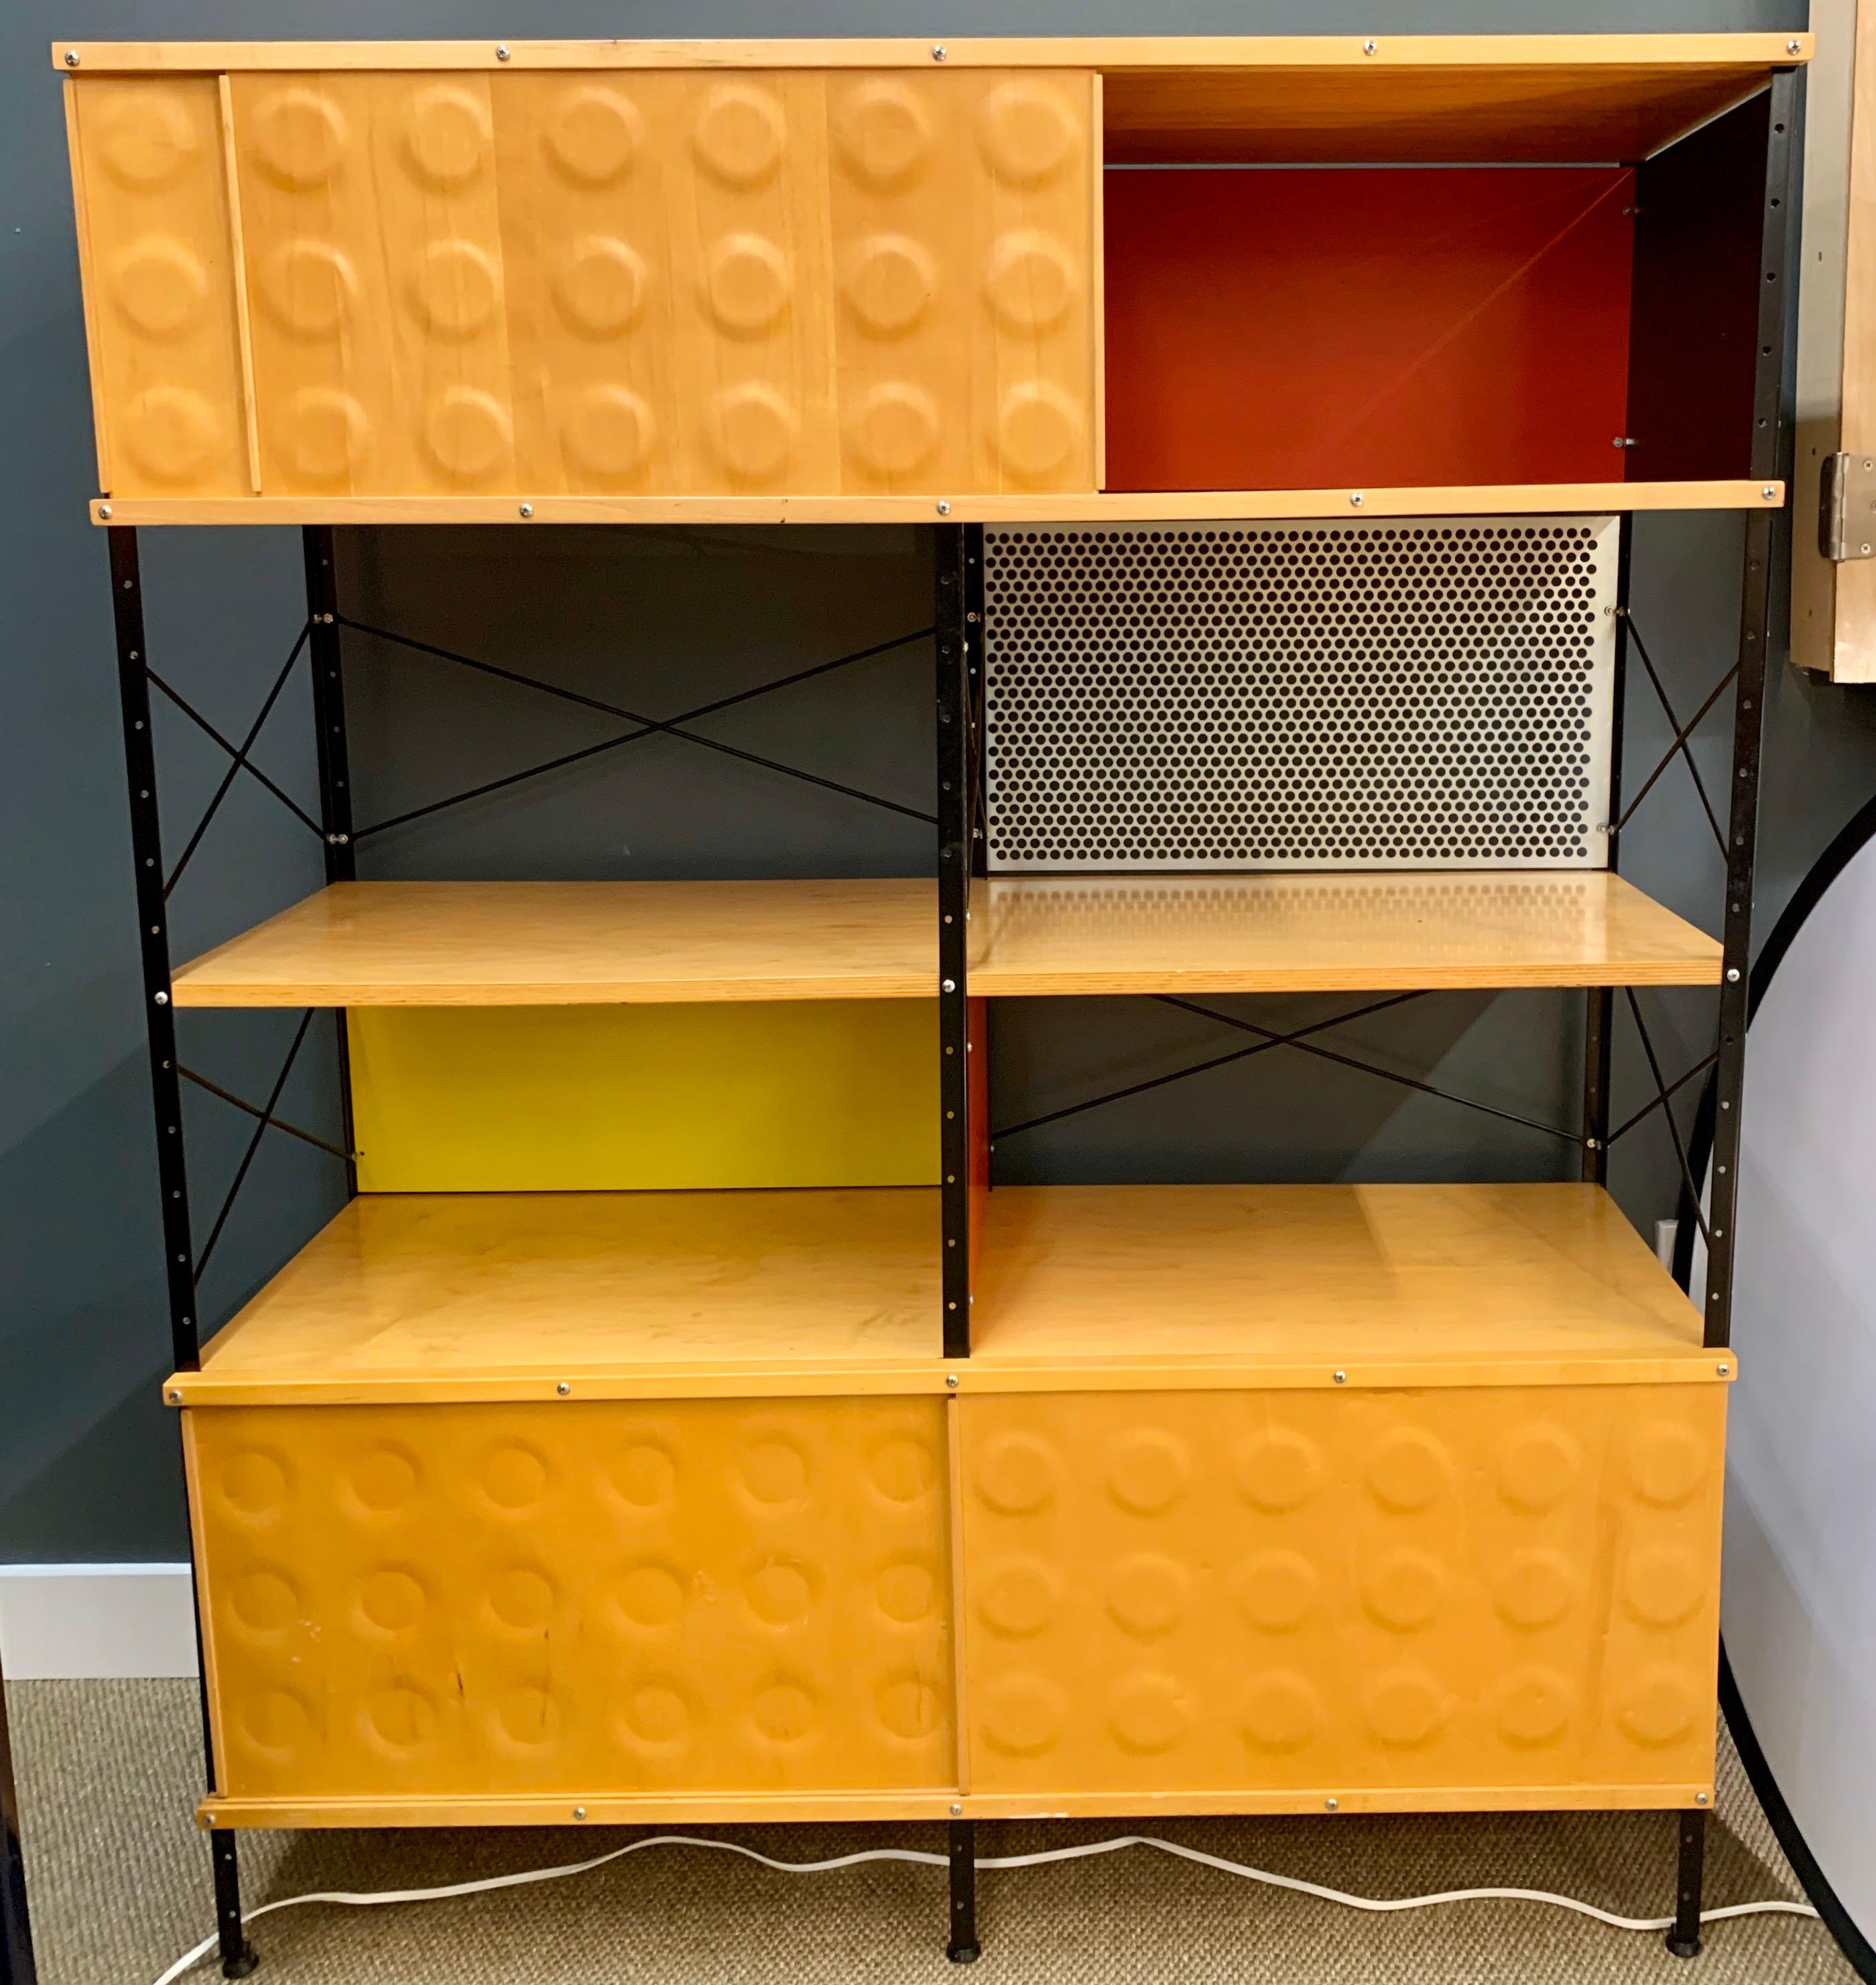 The Charles & Ray Eames ESU 400 N storage unit for Herman Miller. In the USA.
The design features plated steel uprights, and crossed metal struts inspired by industrial warehouse shelving. The walnut wood finish has a beautiful grain with a